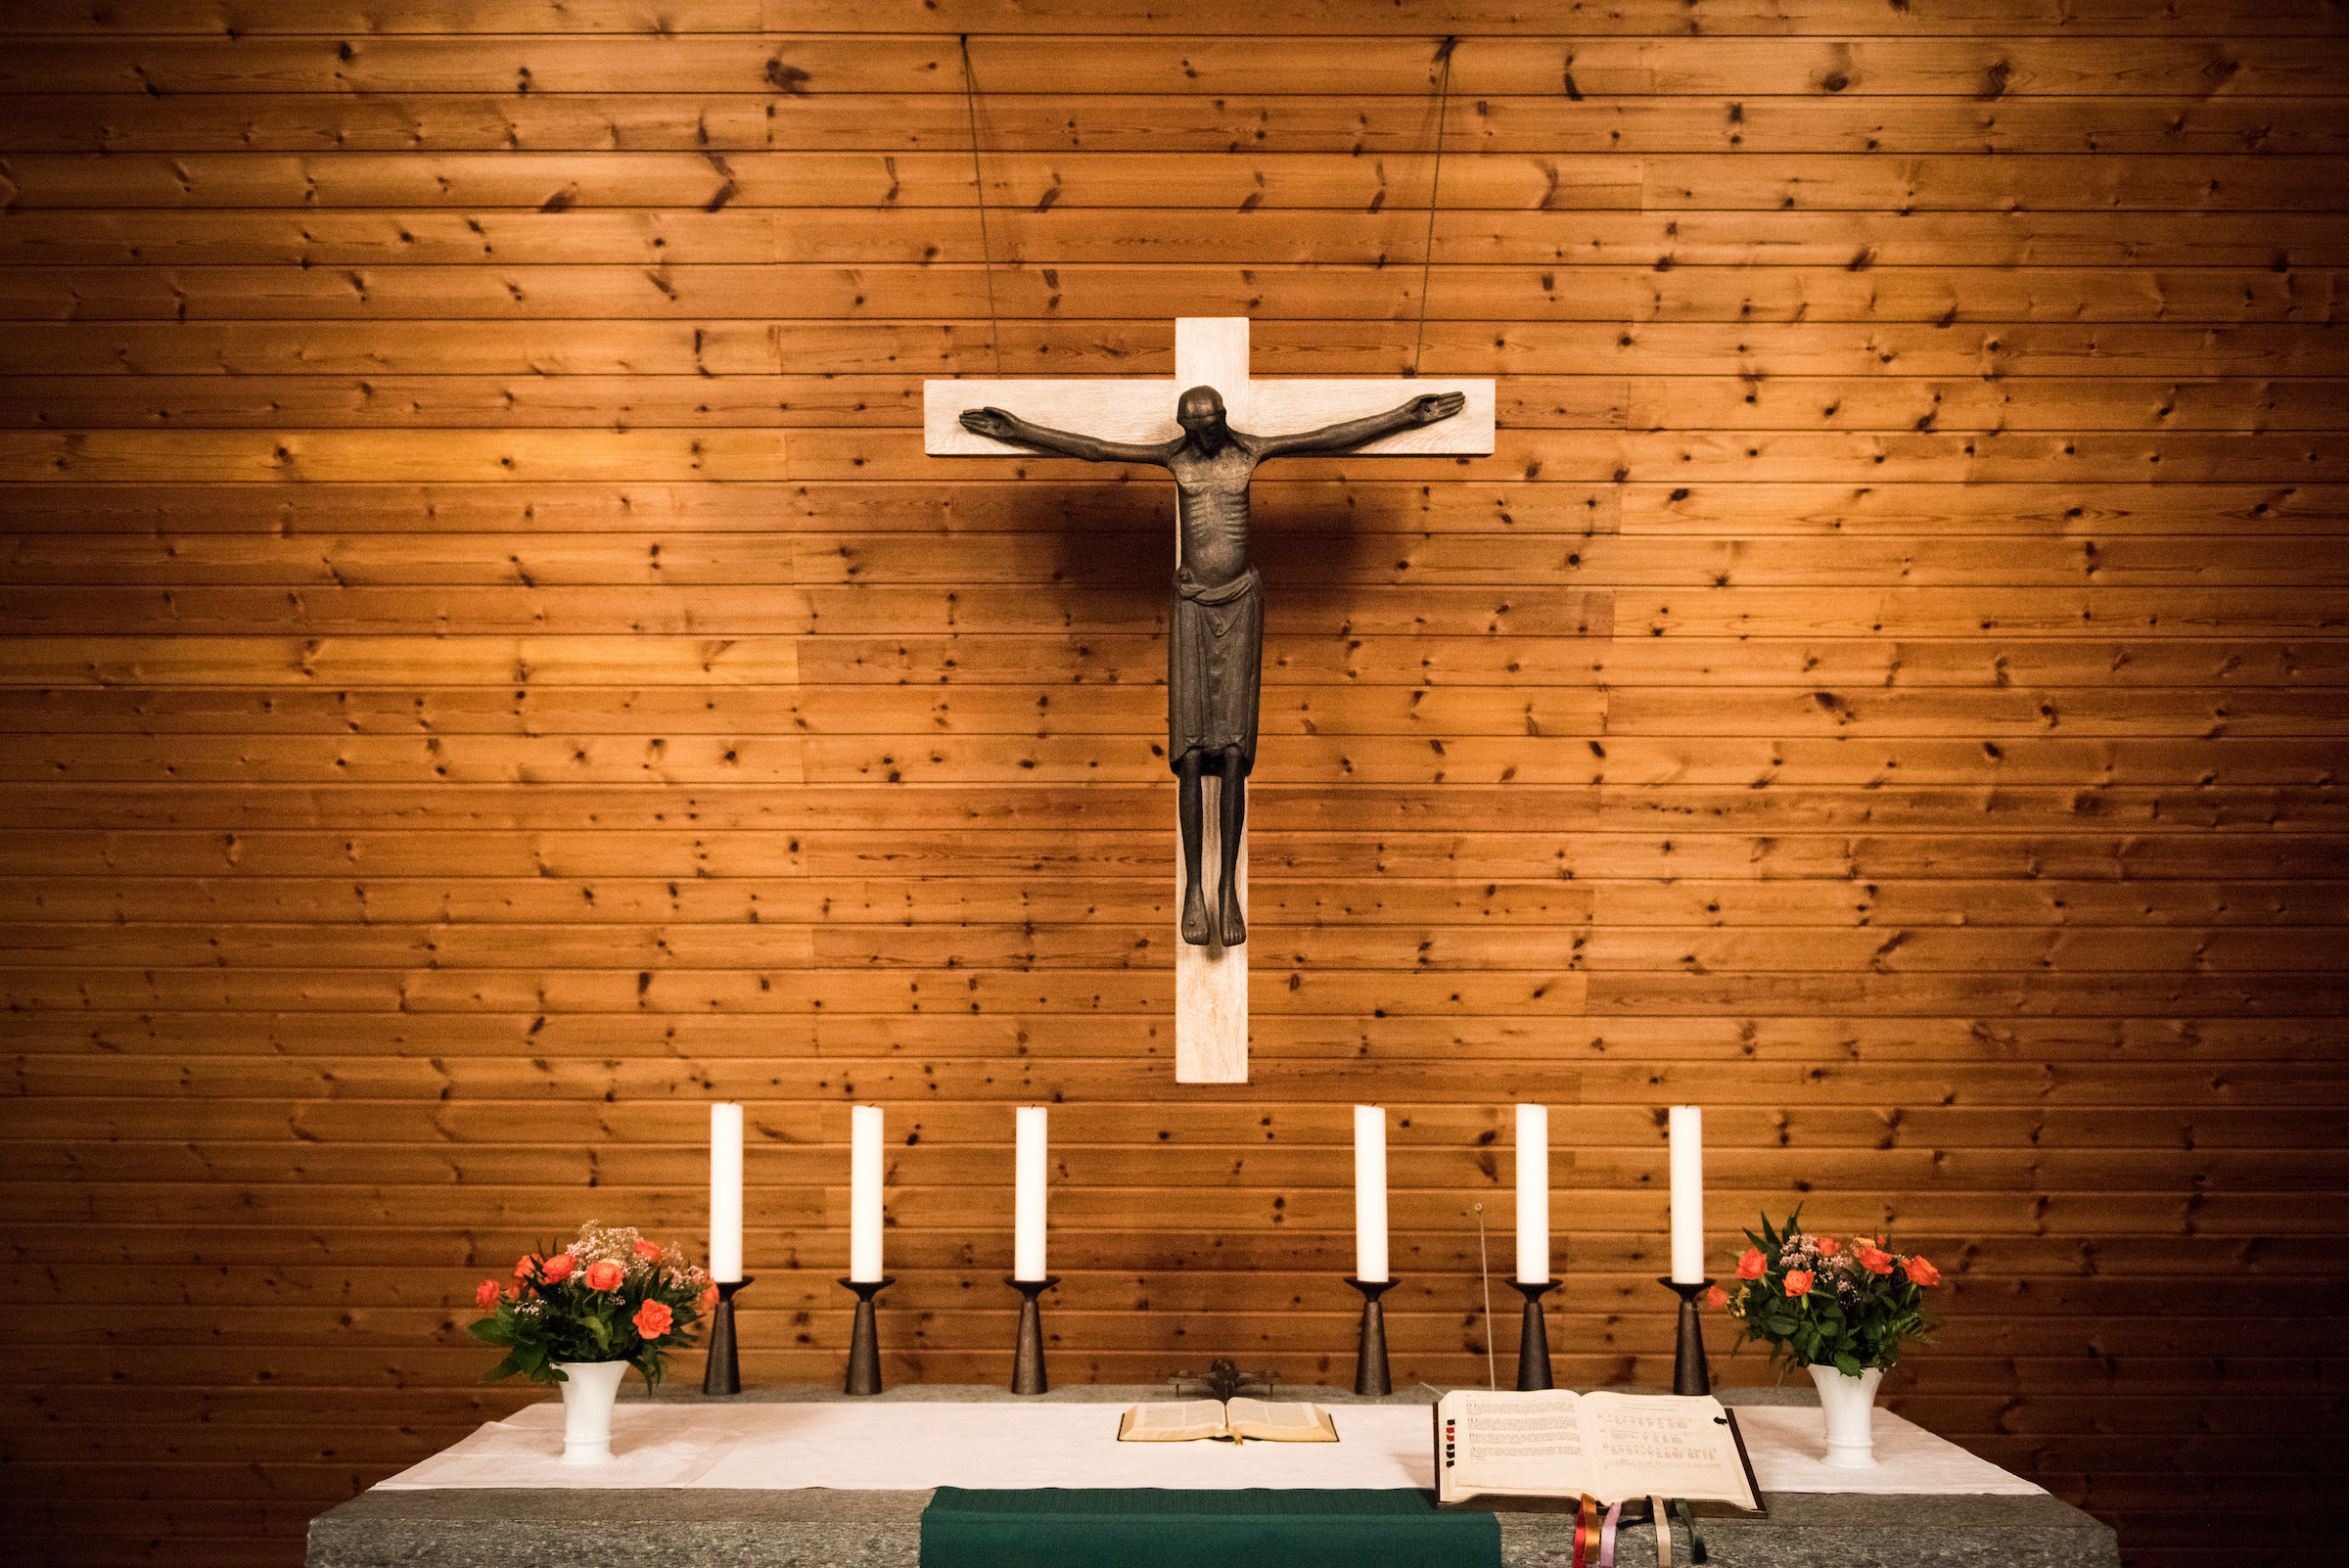 The crucifix at Paul-Gerhardt Gemeinde, a SELK Lutheran church in Braunschweig, Germany, on Thursday, Nov. 12, 2015. LCMS Communications/Erik M. Lunsford